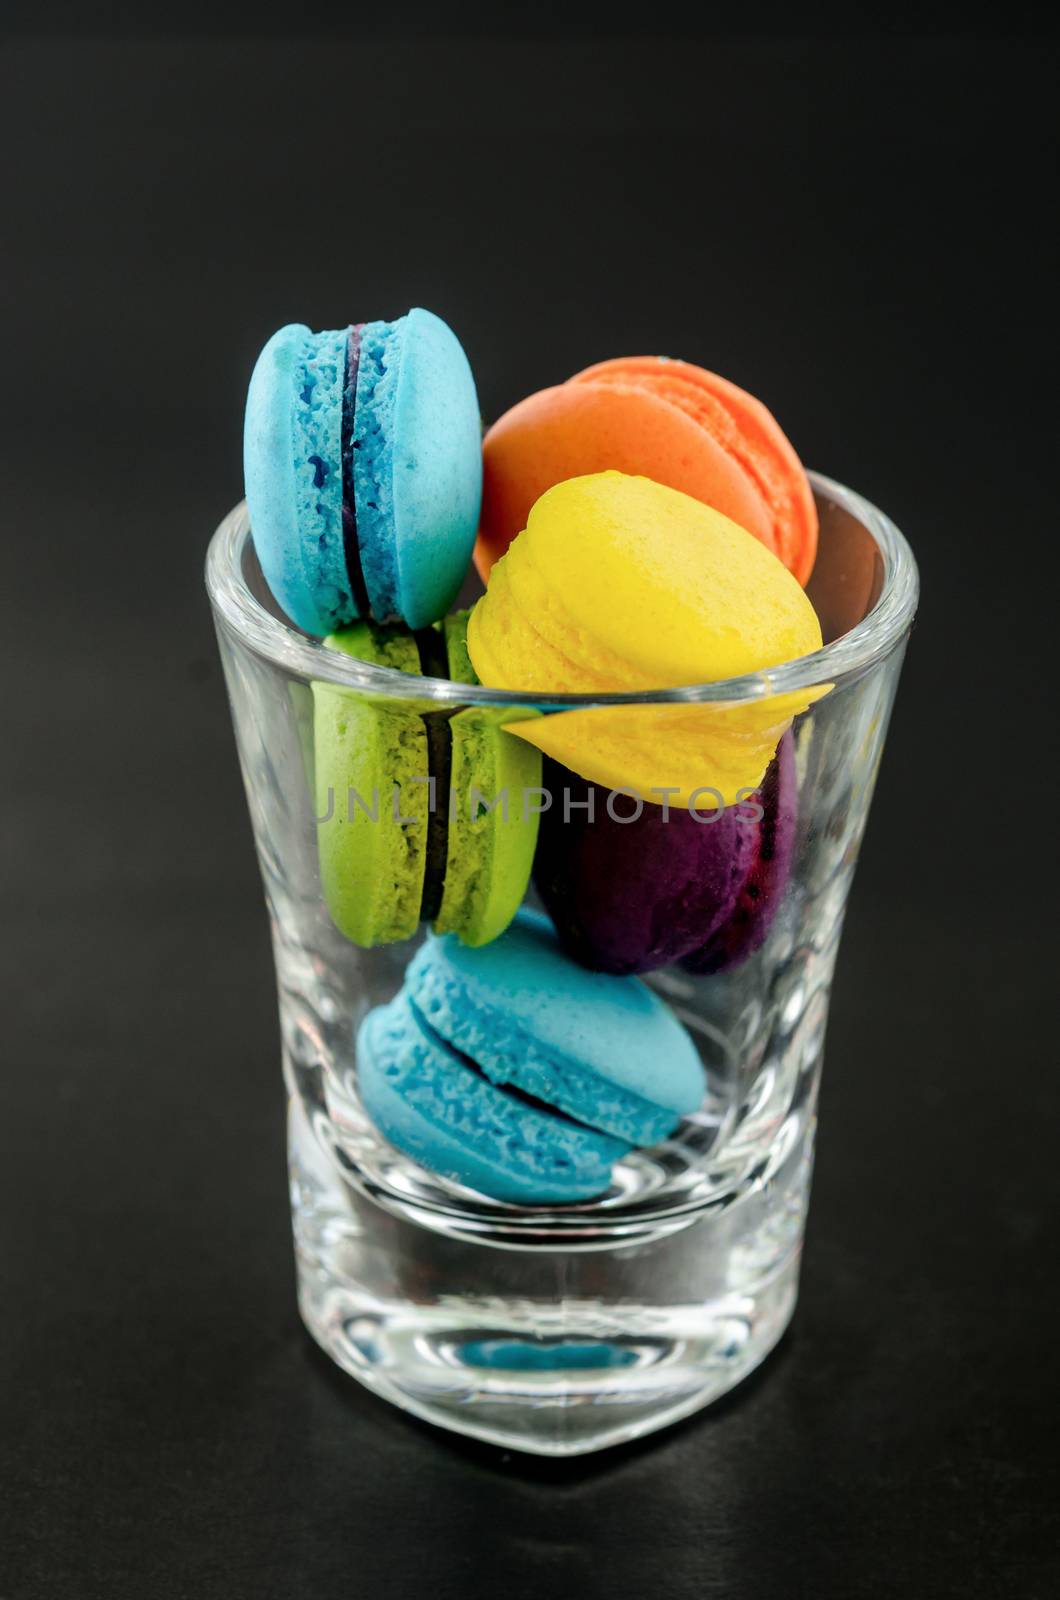 Sweet and colorful french macaroons in glass. by Gamjai